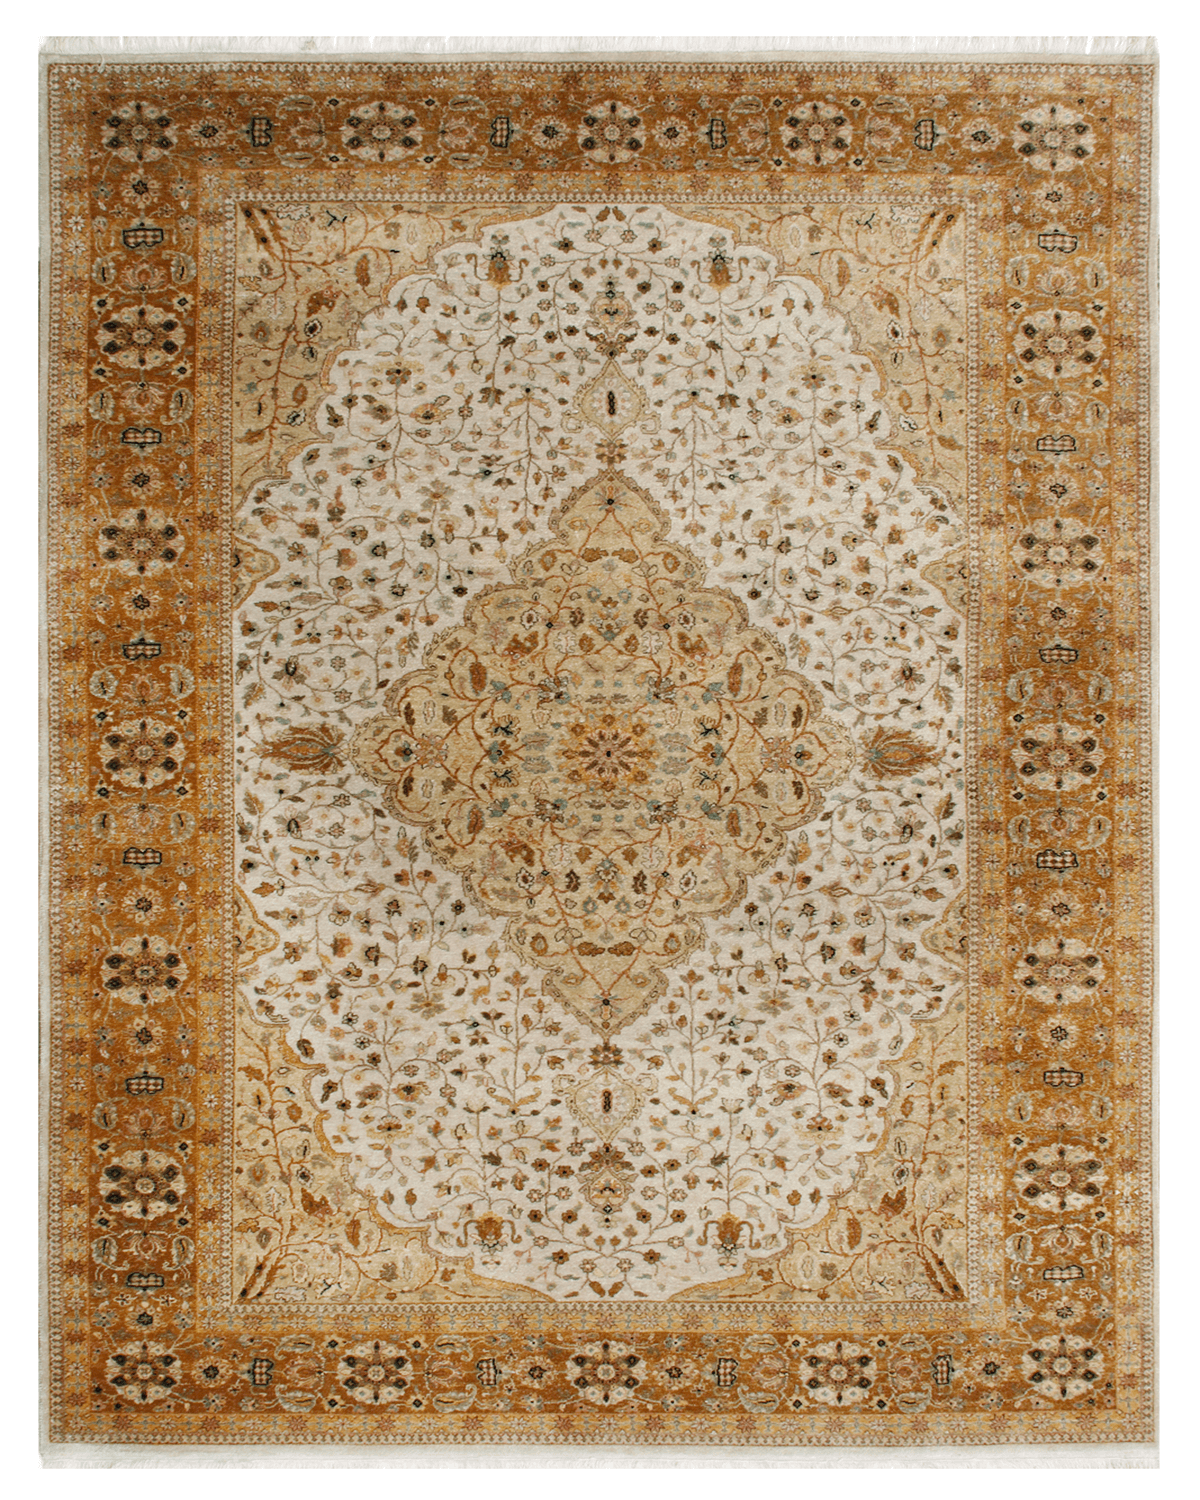 Hand-Knotted Traditional Rug (Tabriz)